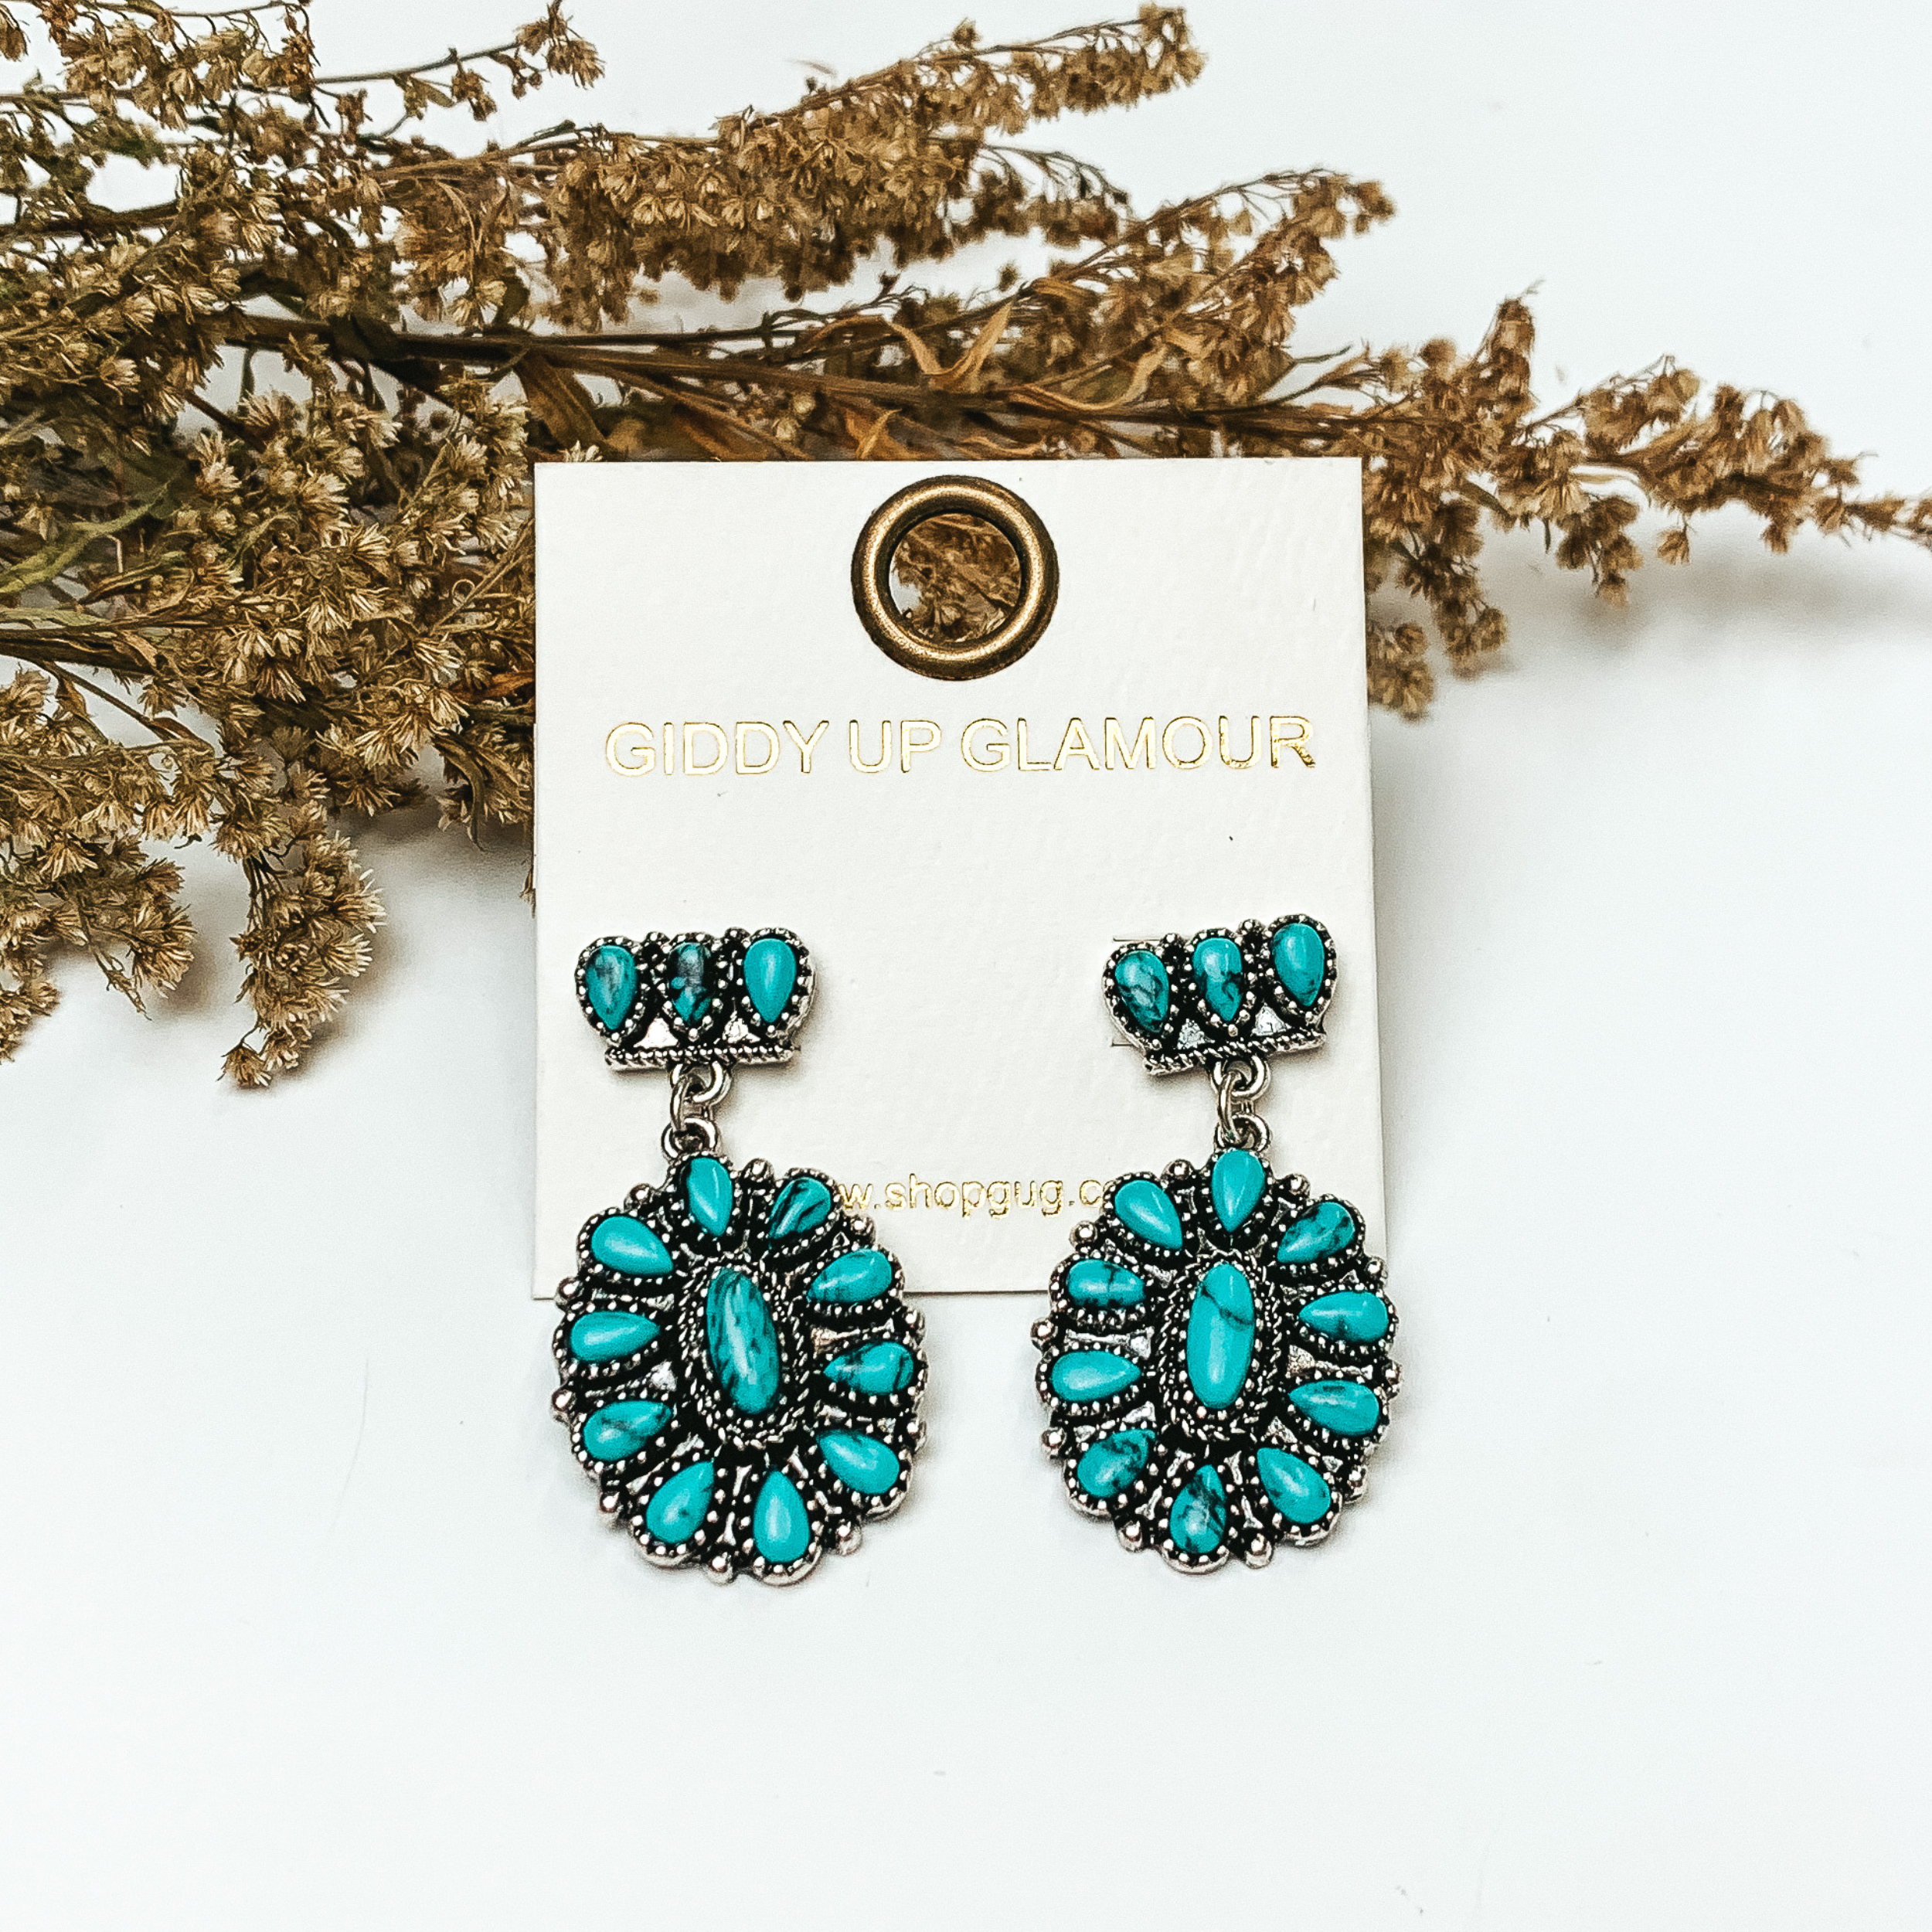 Silver tone cluster post earrings with oval cluster drop with turquoise stones. These earrings are pictured on a white background with greenery behind the earrings.